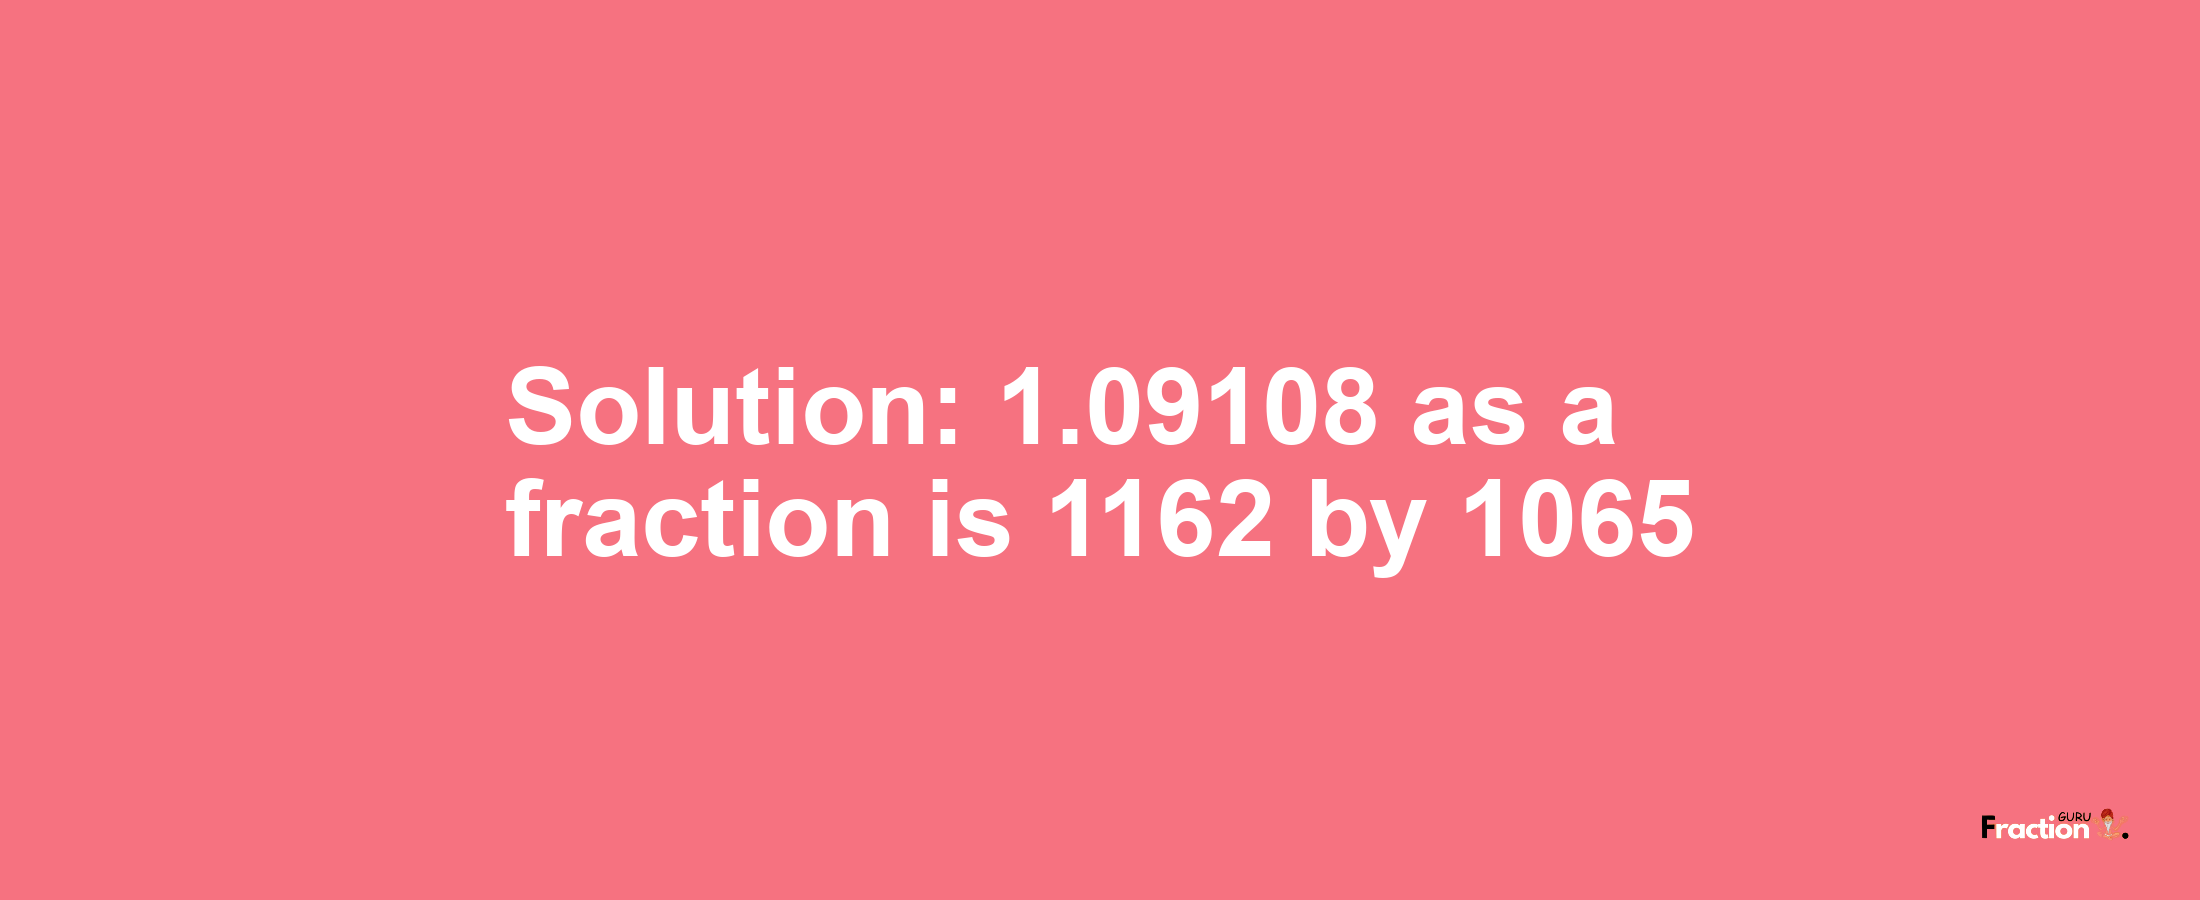 Solution:1.09108 as a fraction is 1162/1065